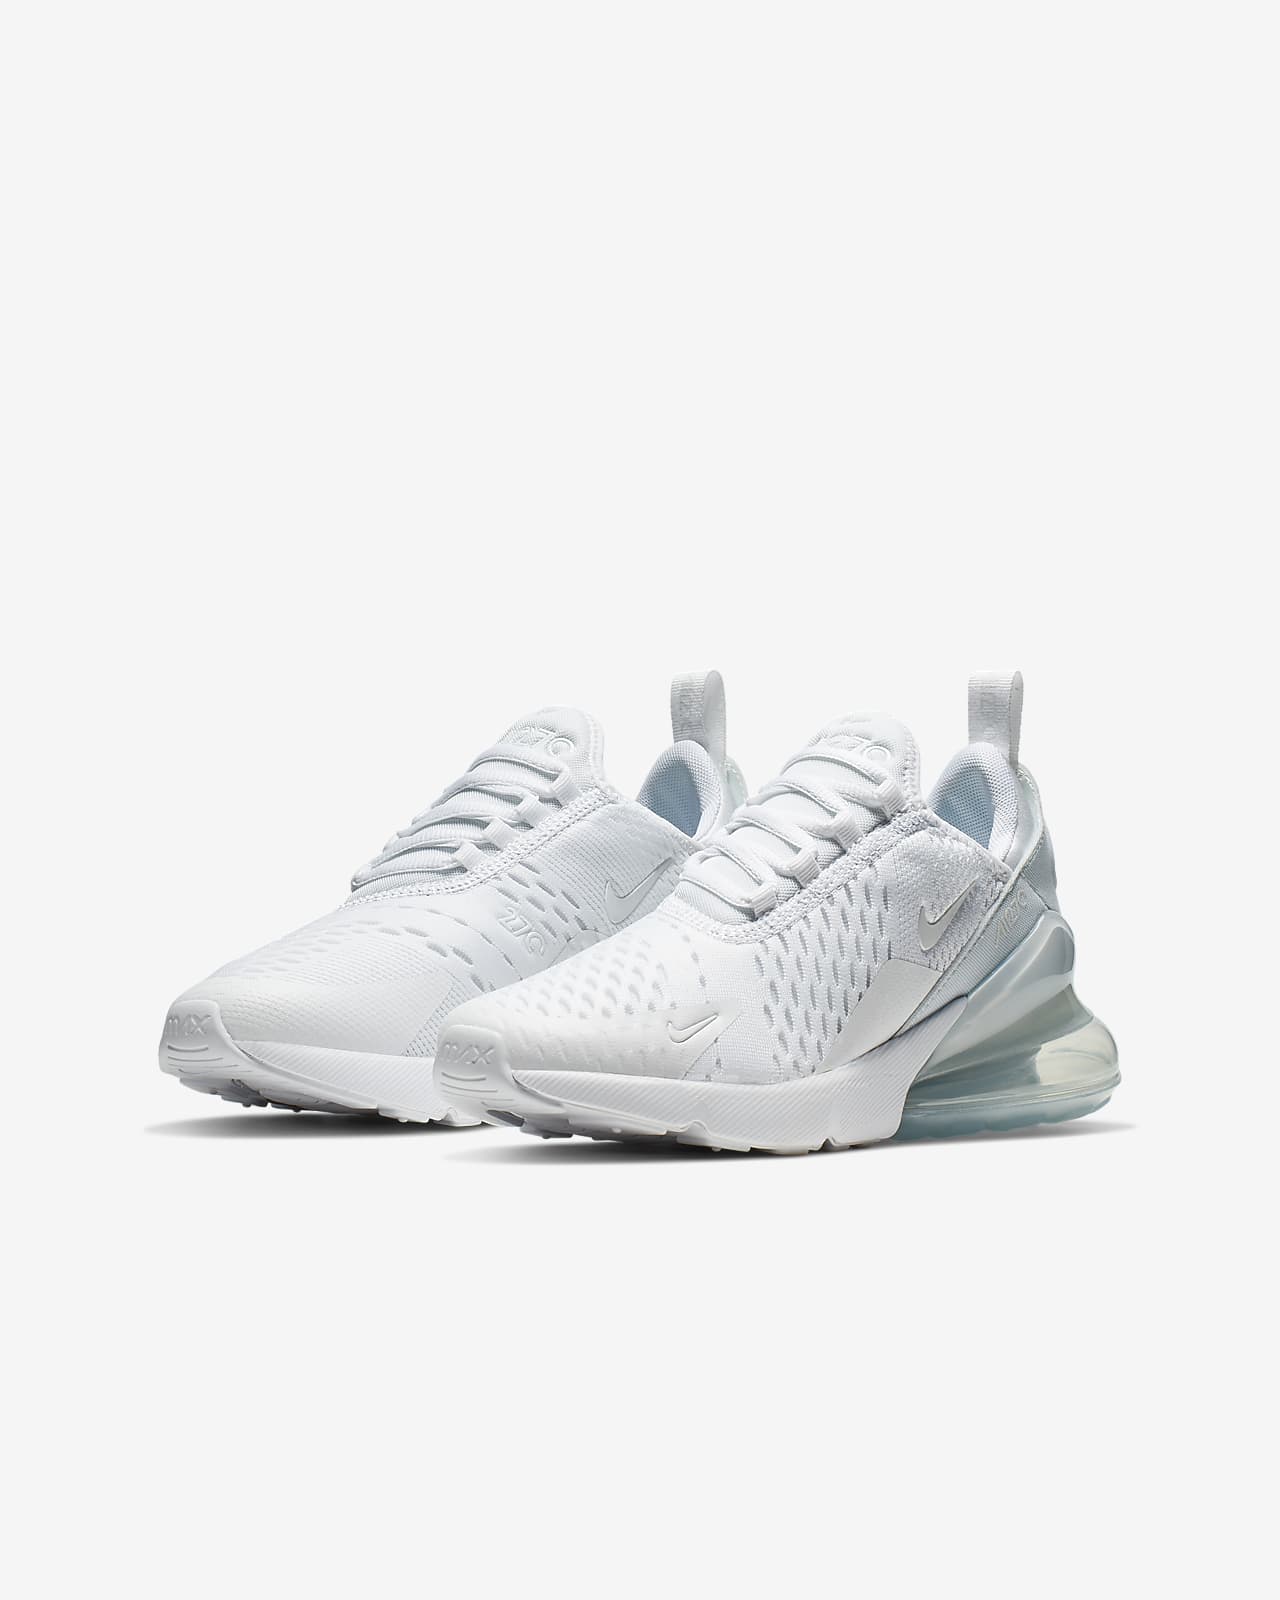 grey and white air max 270